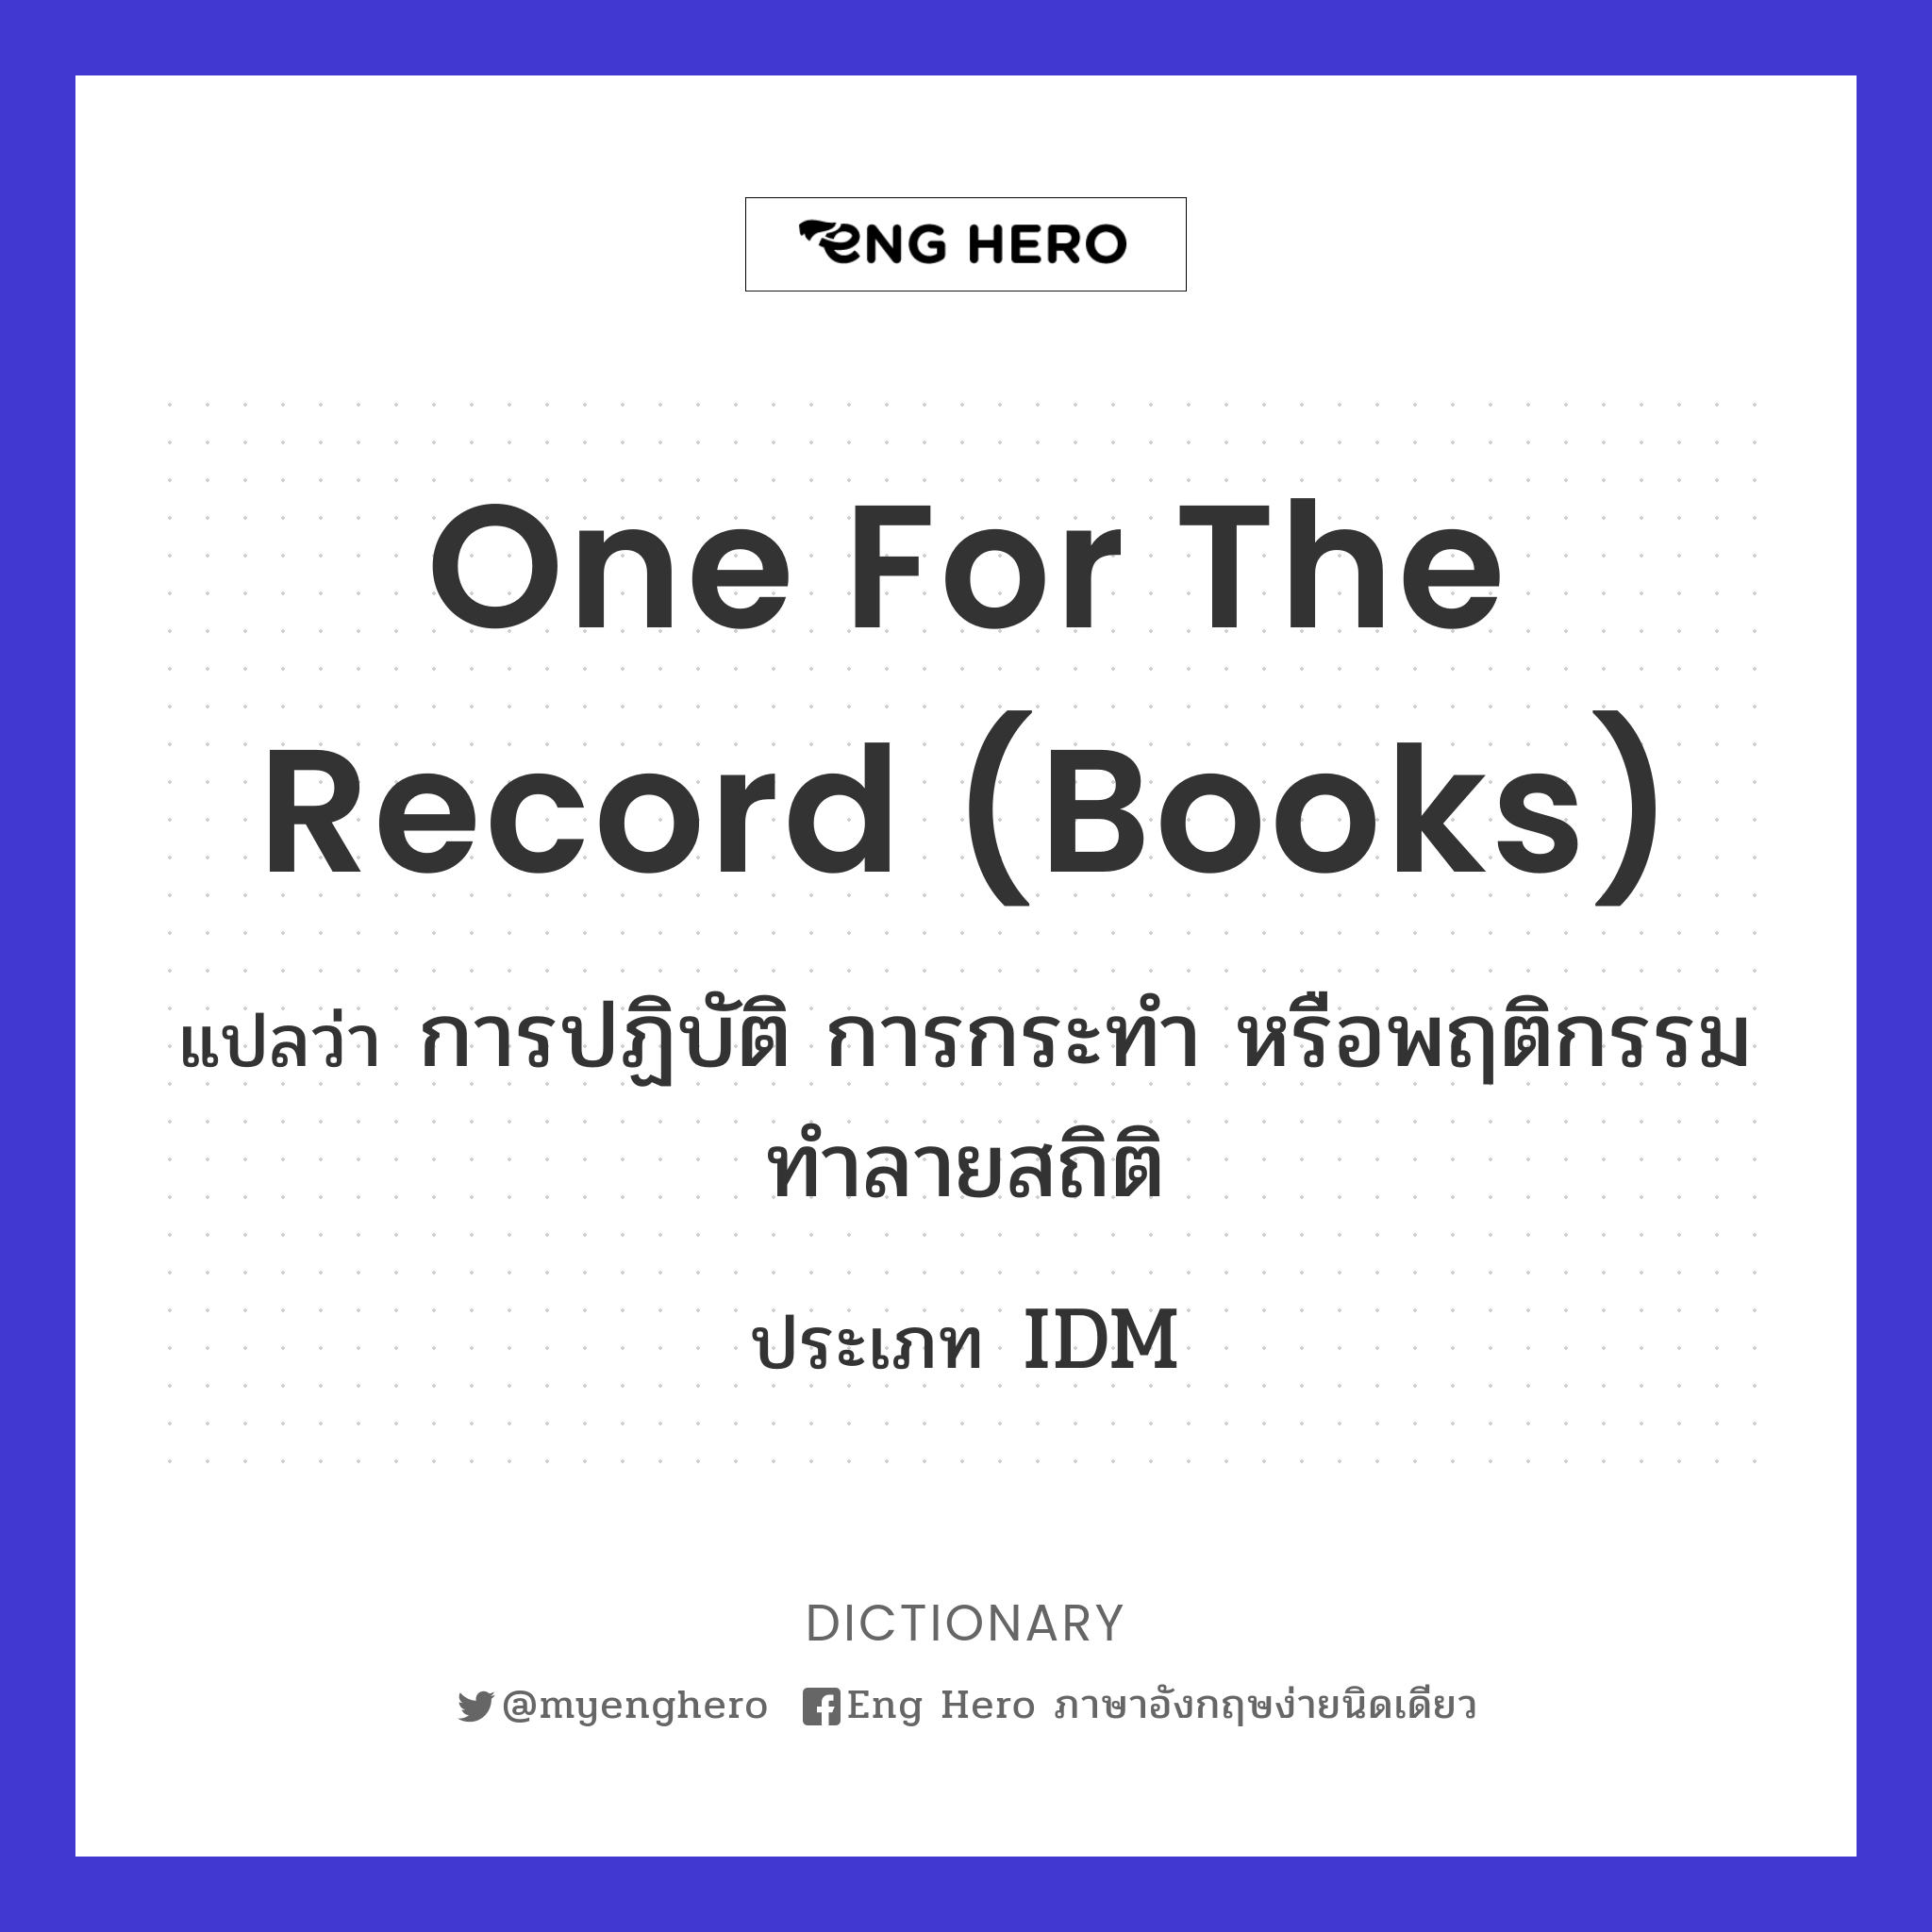 one for the record (books)